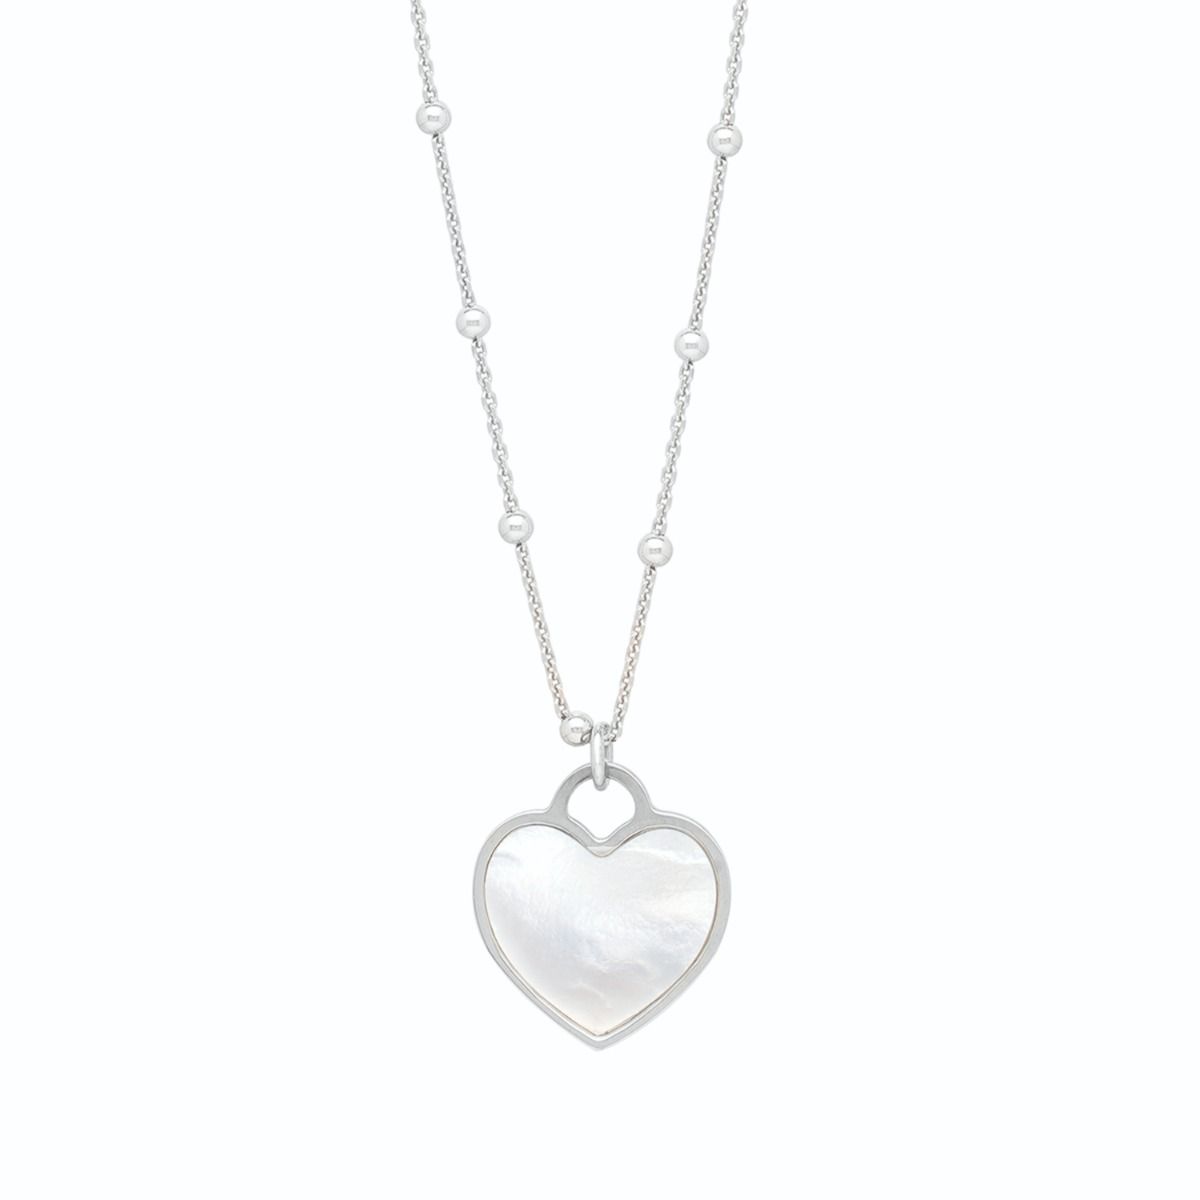 agc17208-18 Silver & Mother of Pearl Heart Pendant | Royal Chain Group